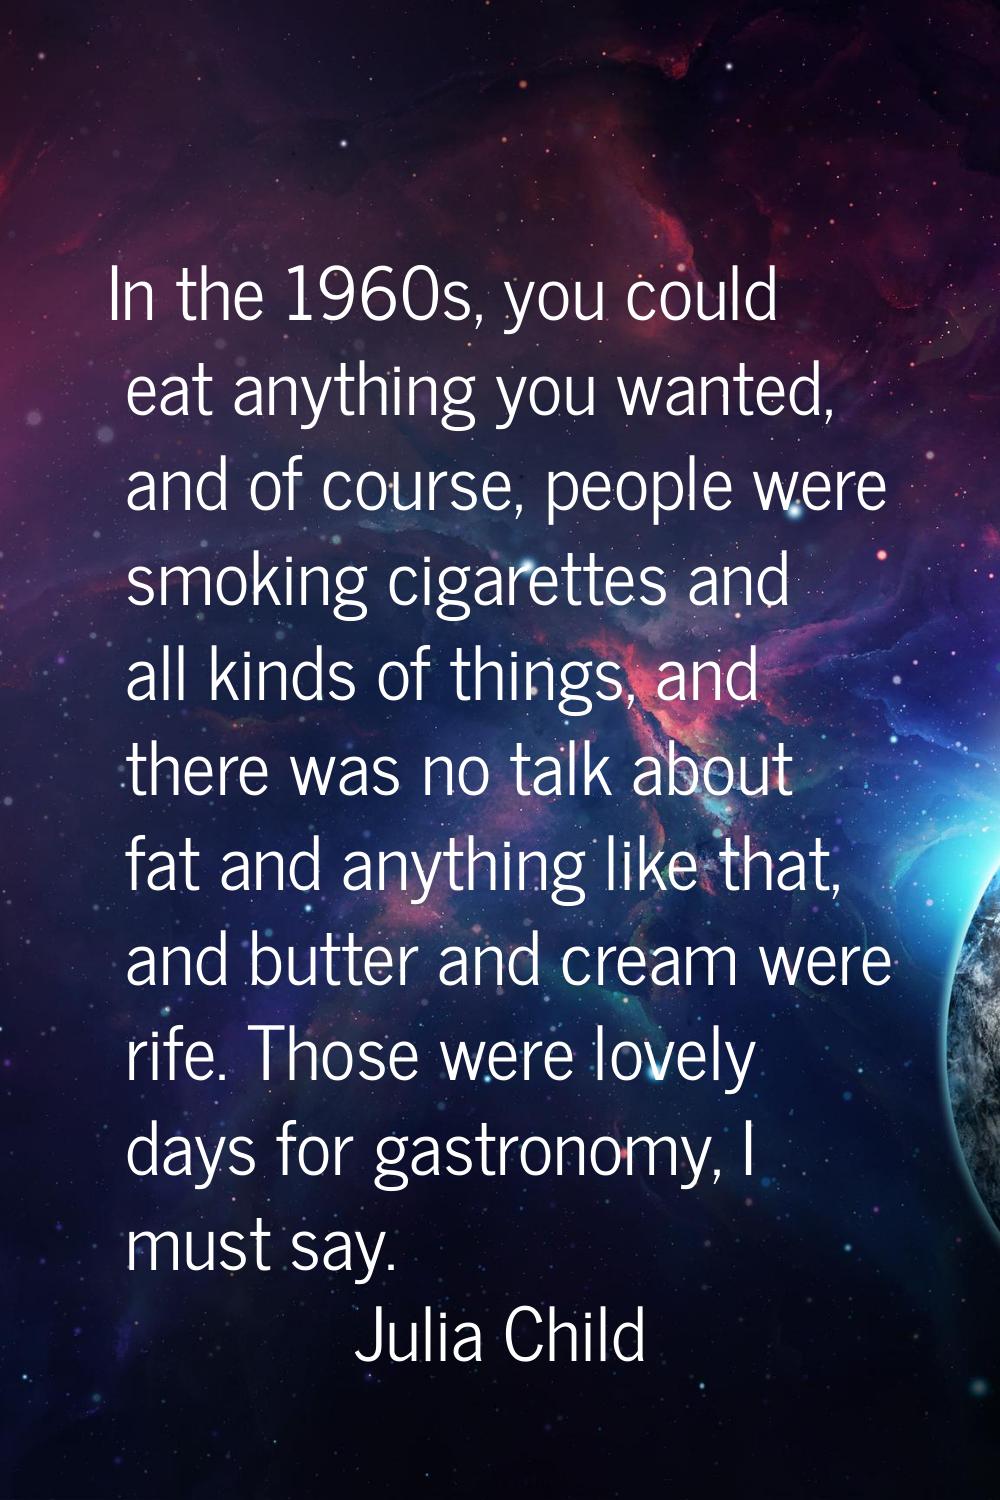 In the 1960s, you could eat anything you wanted, and of course, people were smoking cigarettes and 